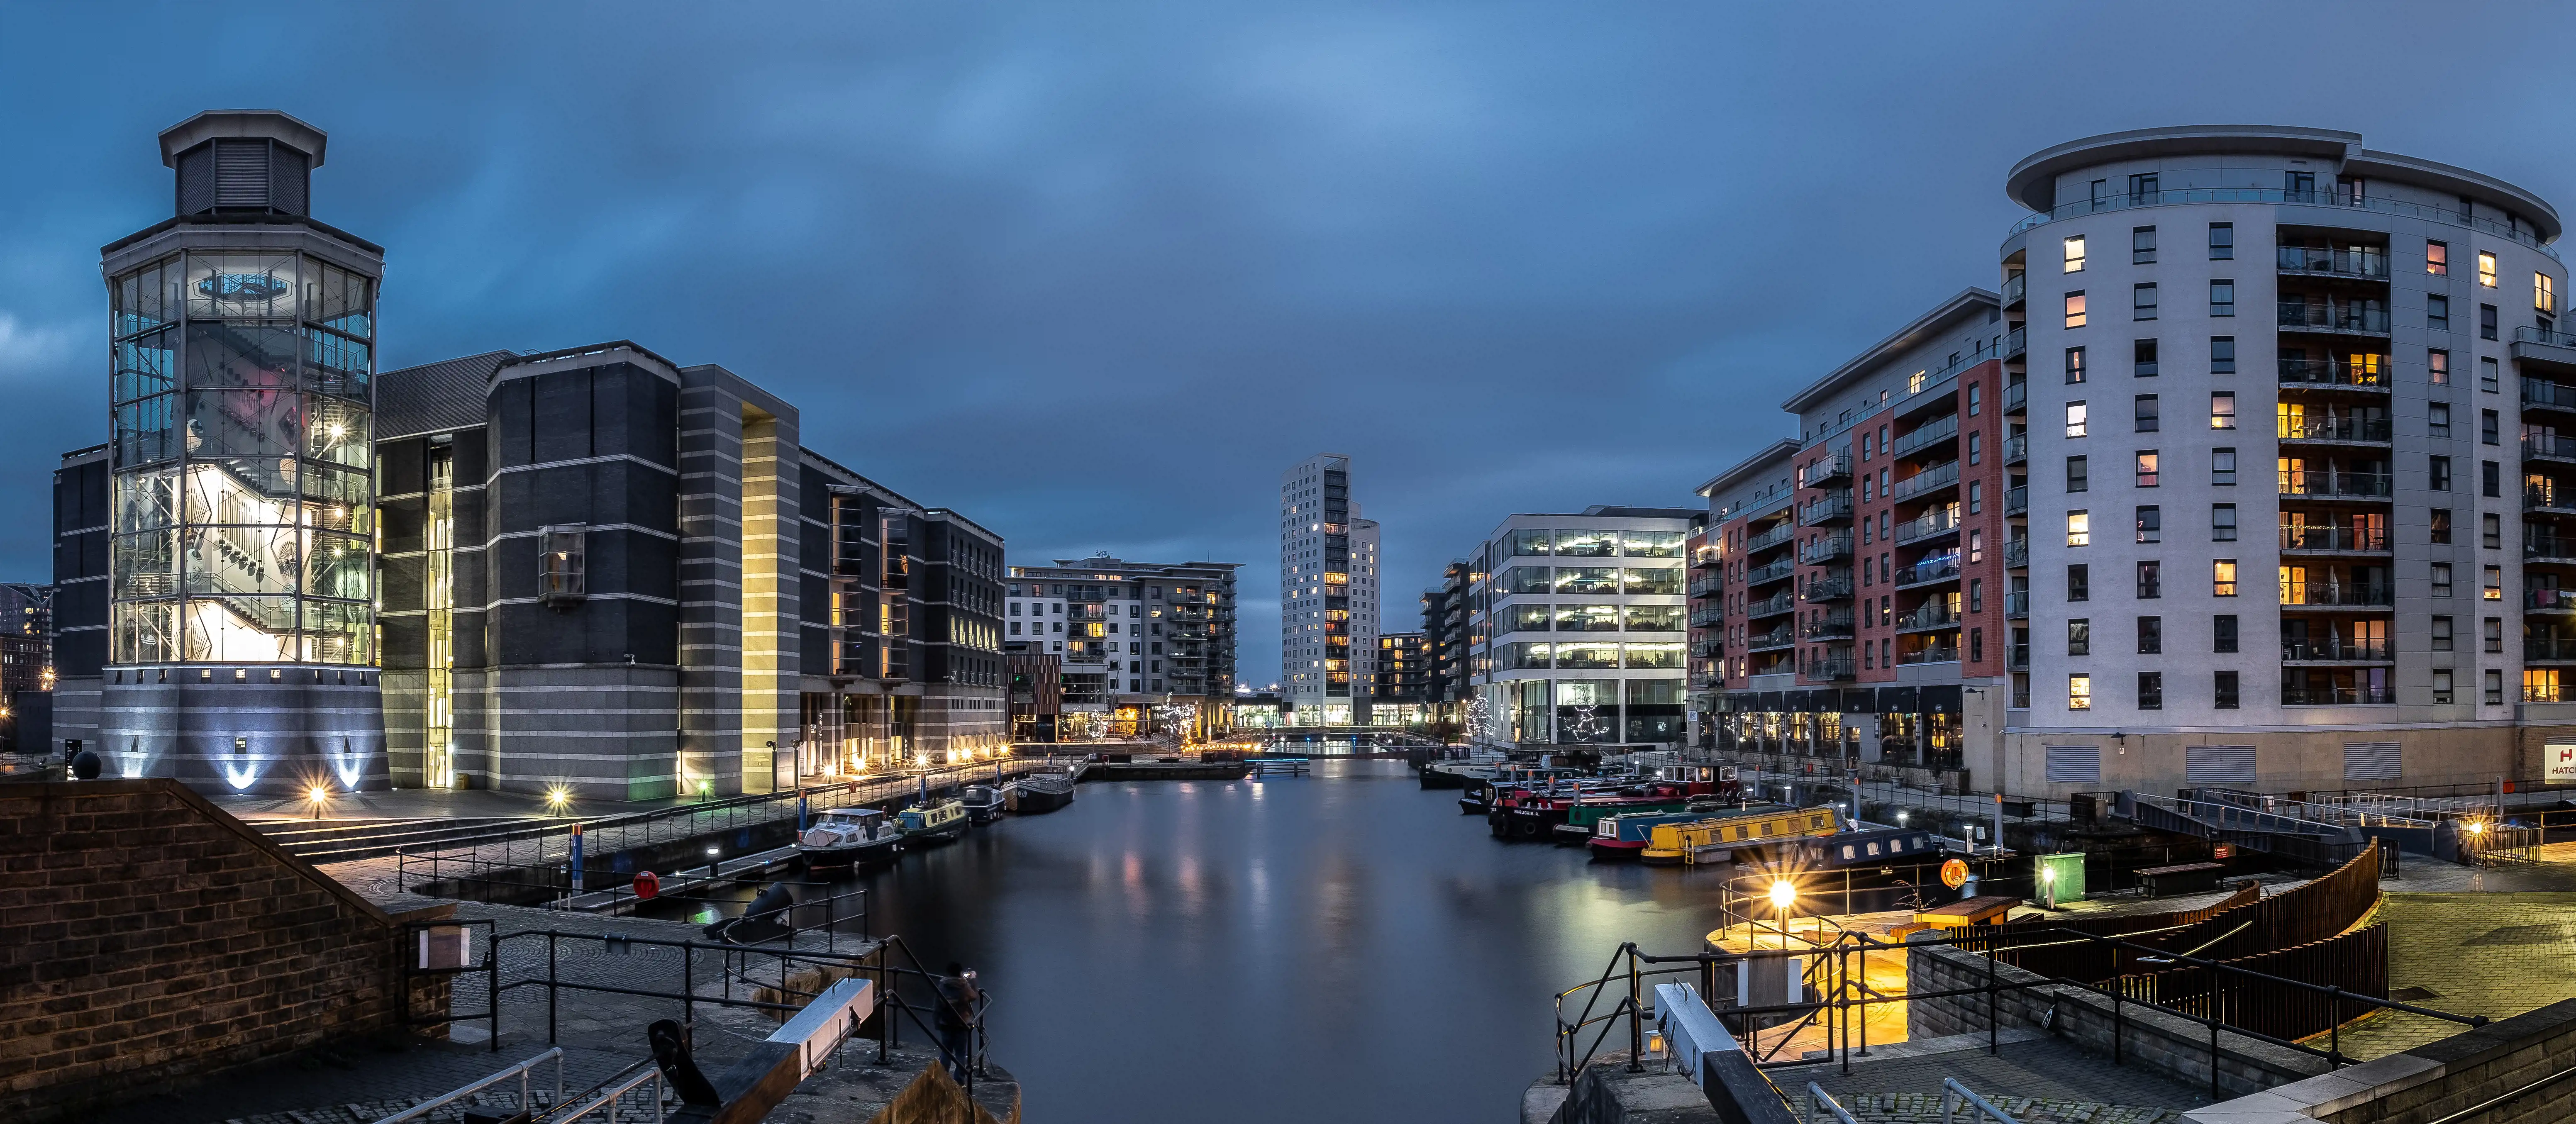 A view of Leeds Dock - located near Royal Armouries